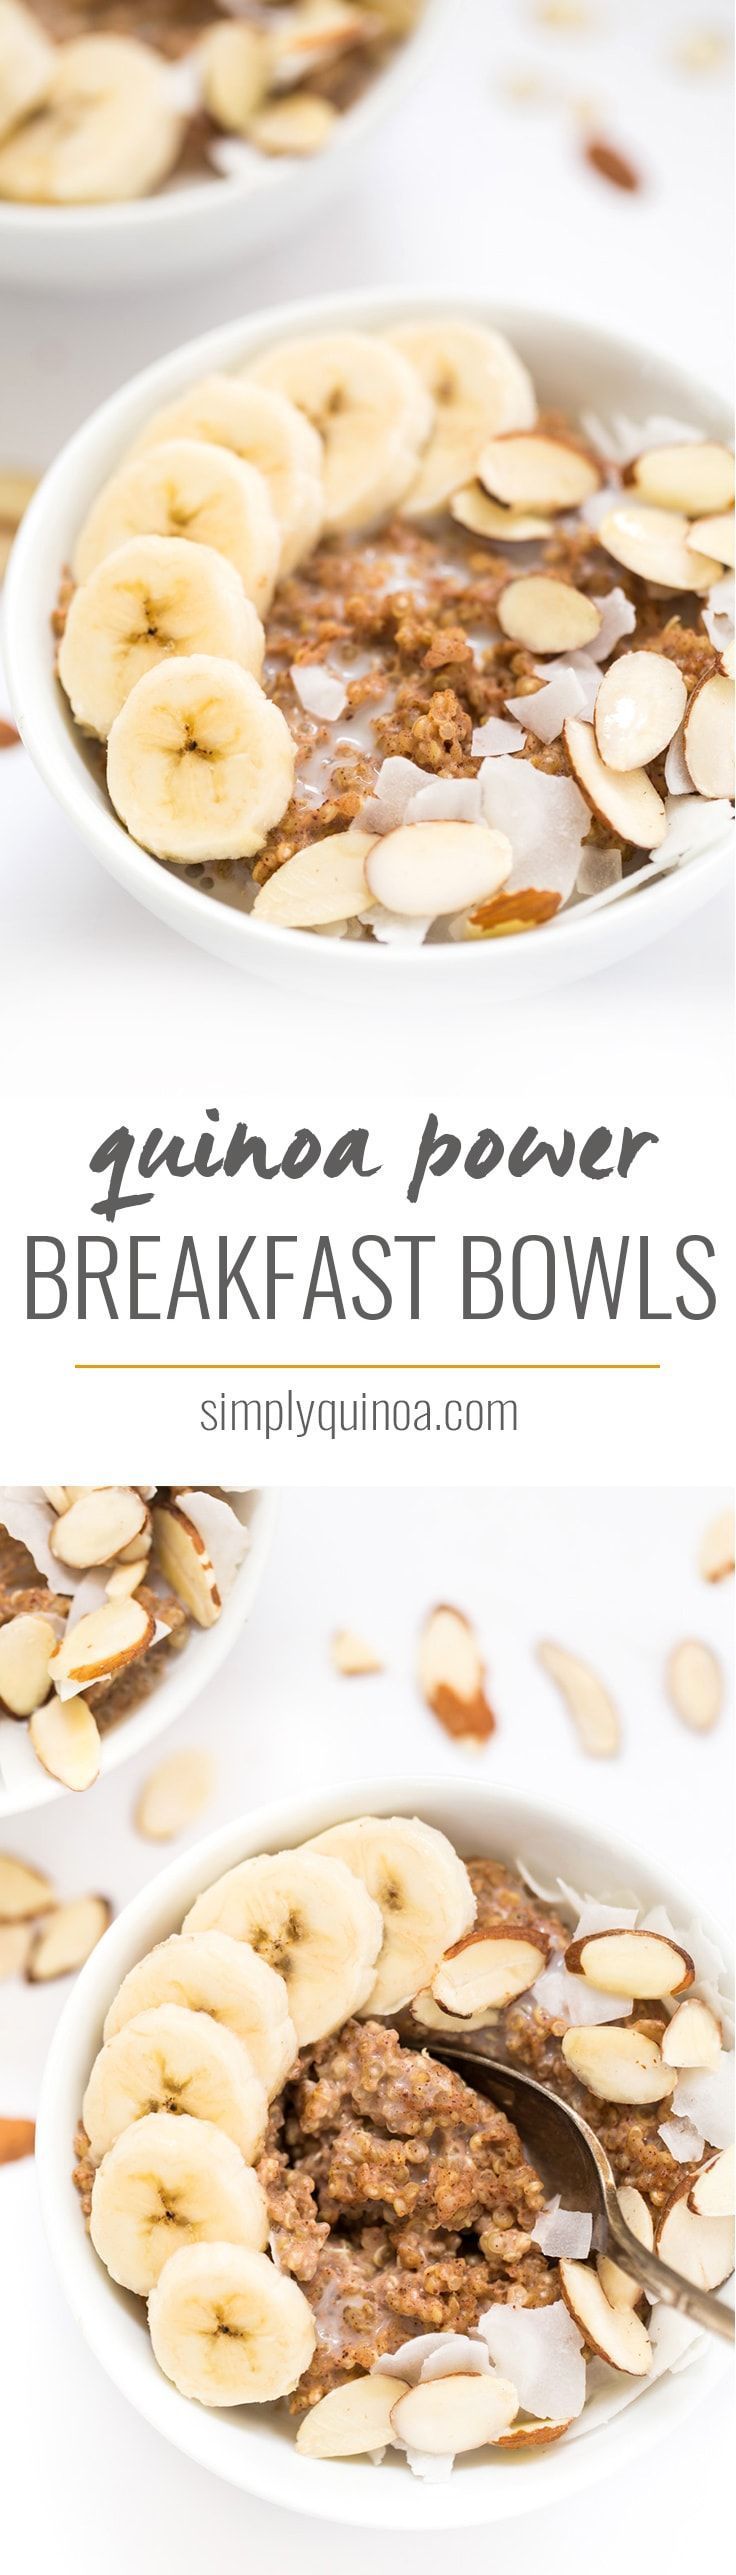 Kick start your day with these delicious QUINOA POWER BREAKFAST BOWLS! They’re a cinch to make, are packed with protein and will